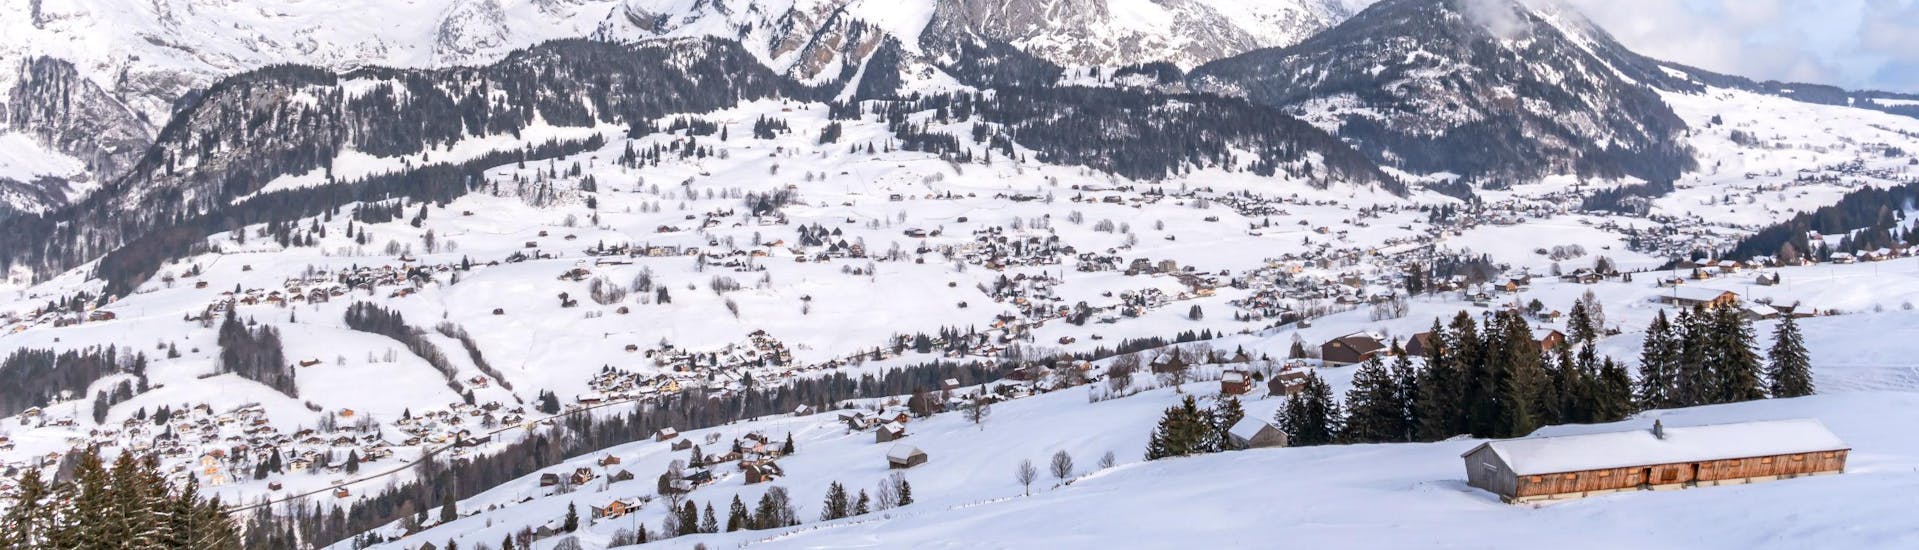 An image of Wildhaus in the Swiss region of Toggenburg, where visitors can book ski lessons with the local ski schools.